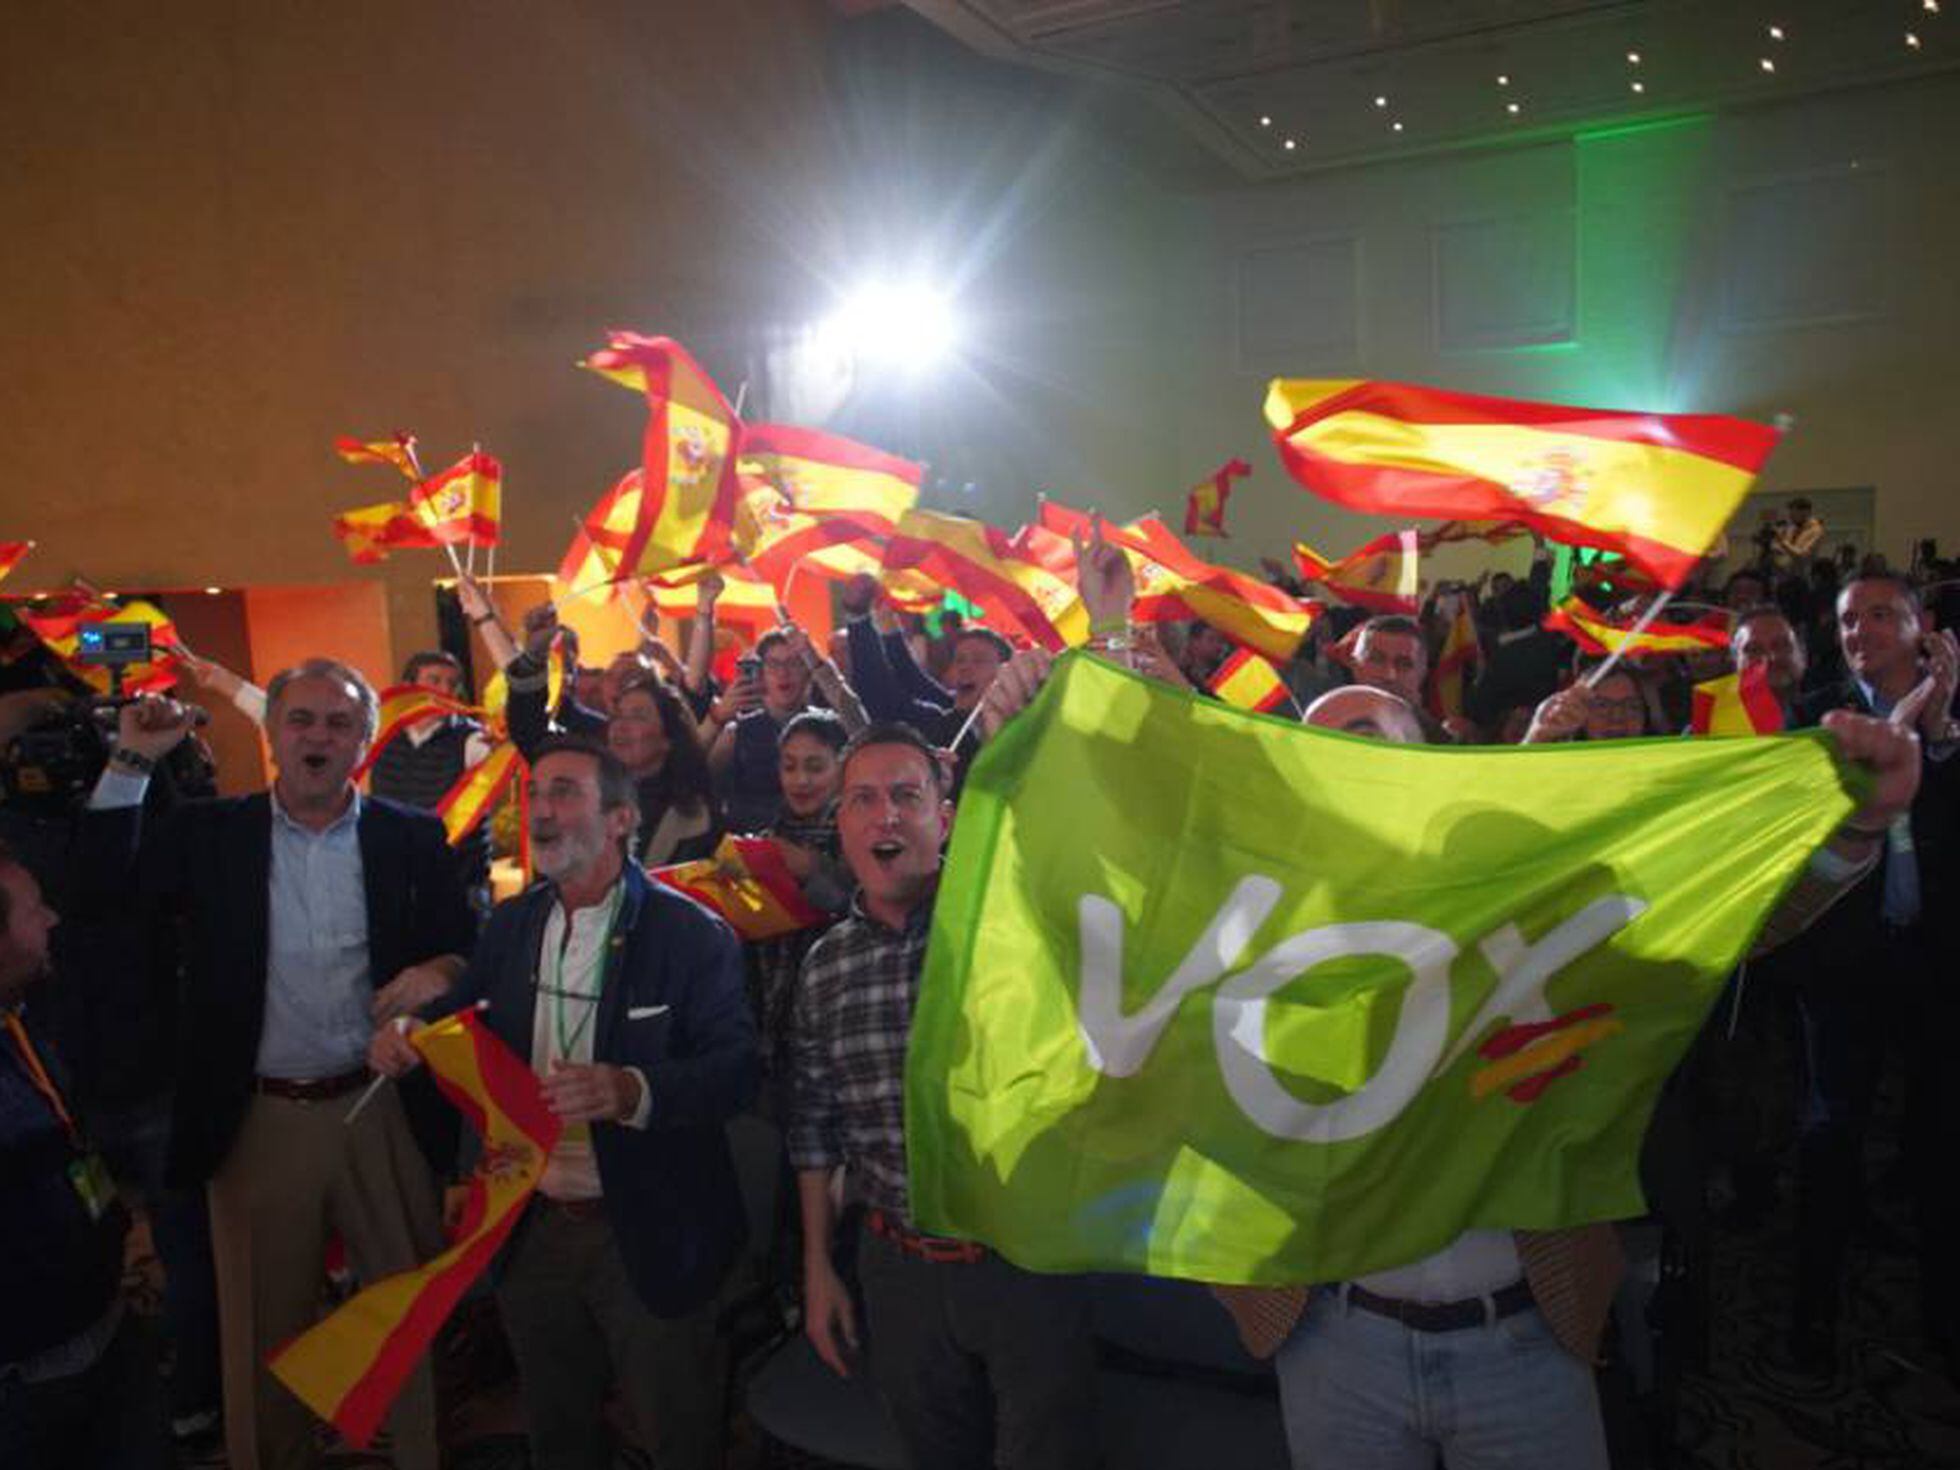 Vox: Who are Spain's hard-right party and who are their voters?